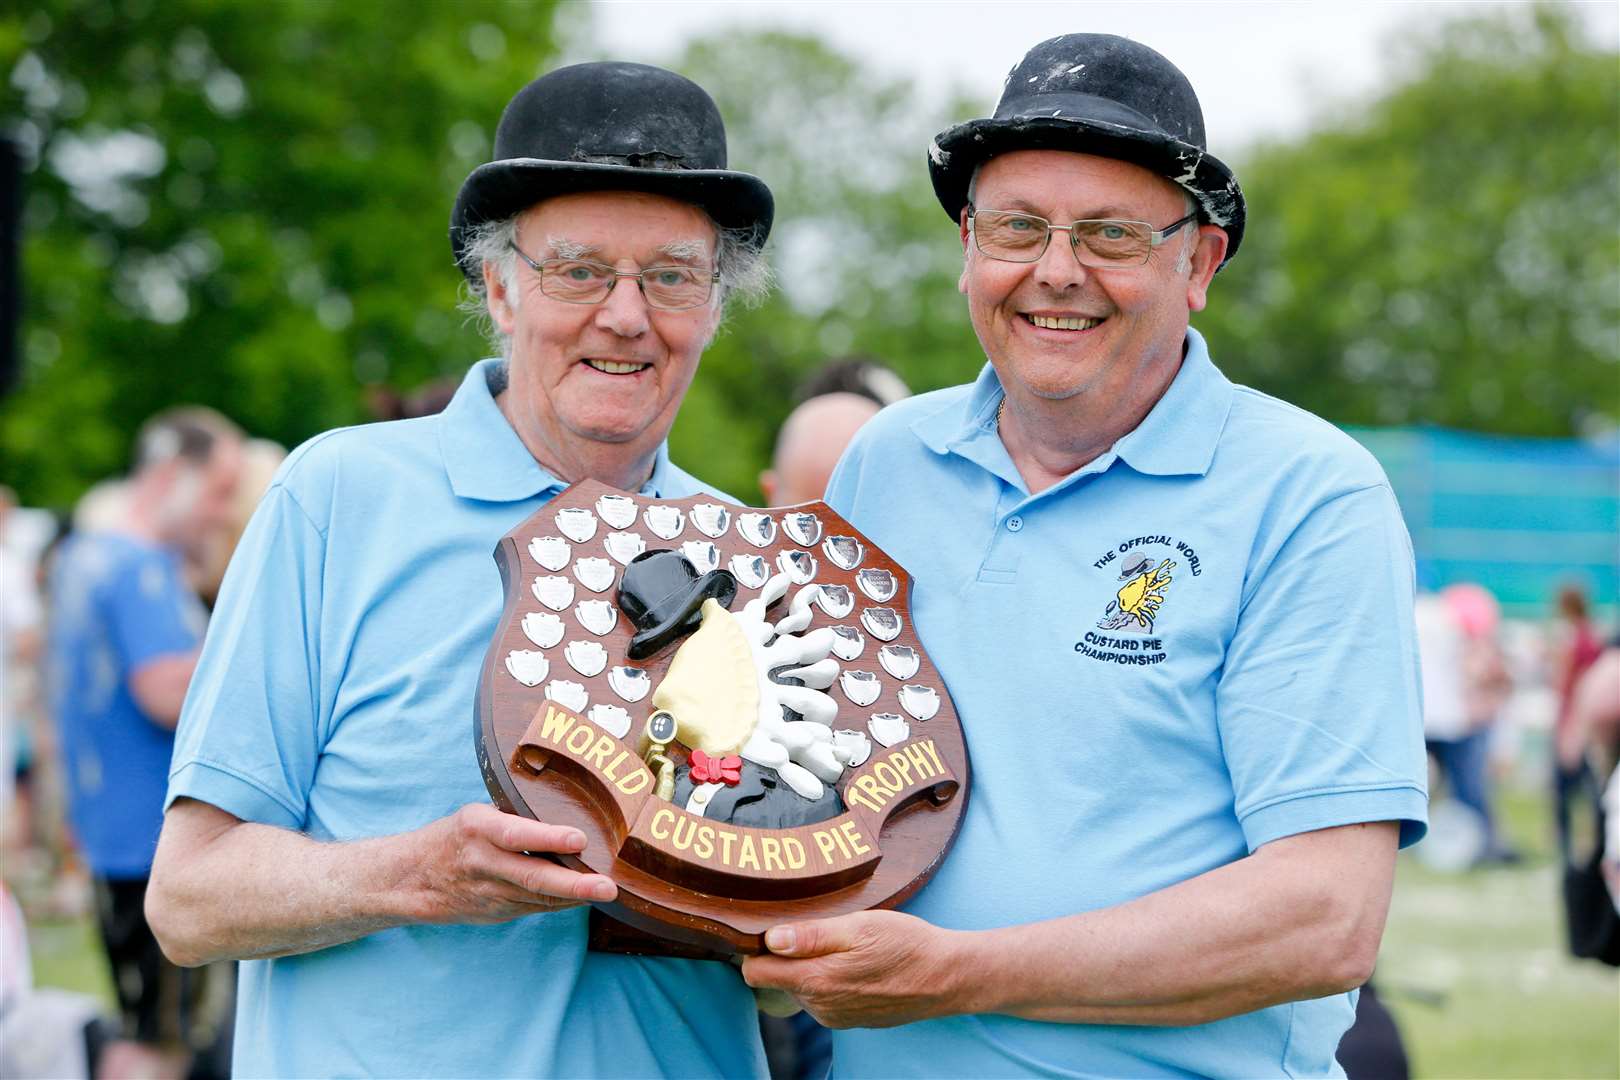 Brian Mortimer with friend Mike FitzGerald holding the Custard Pie Trophy